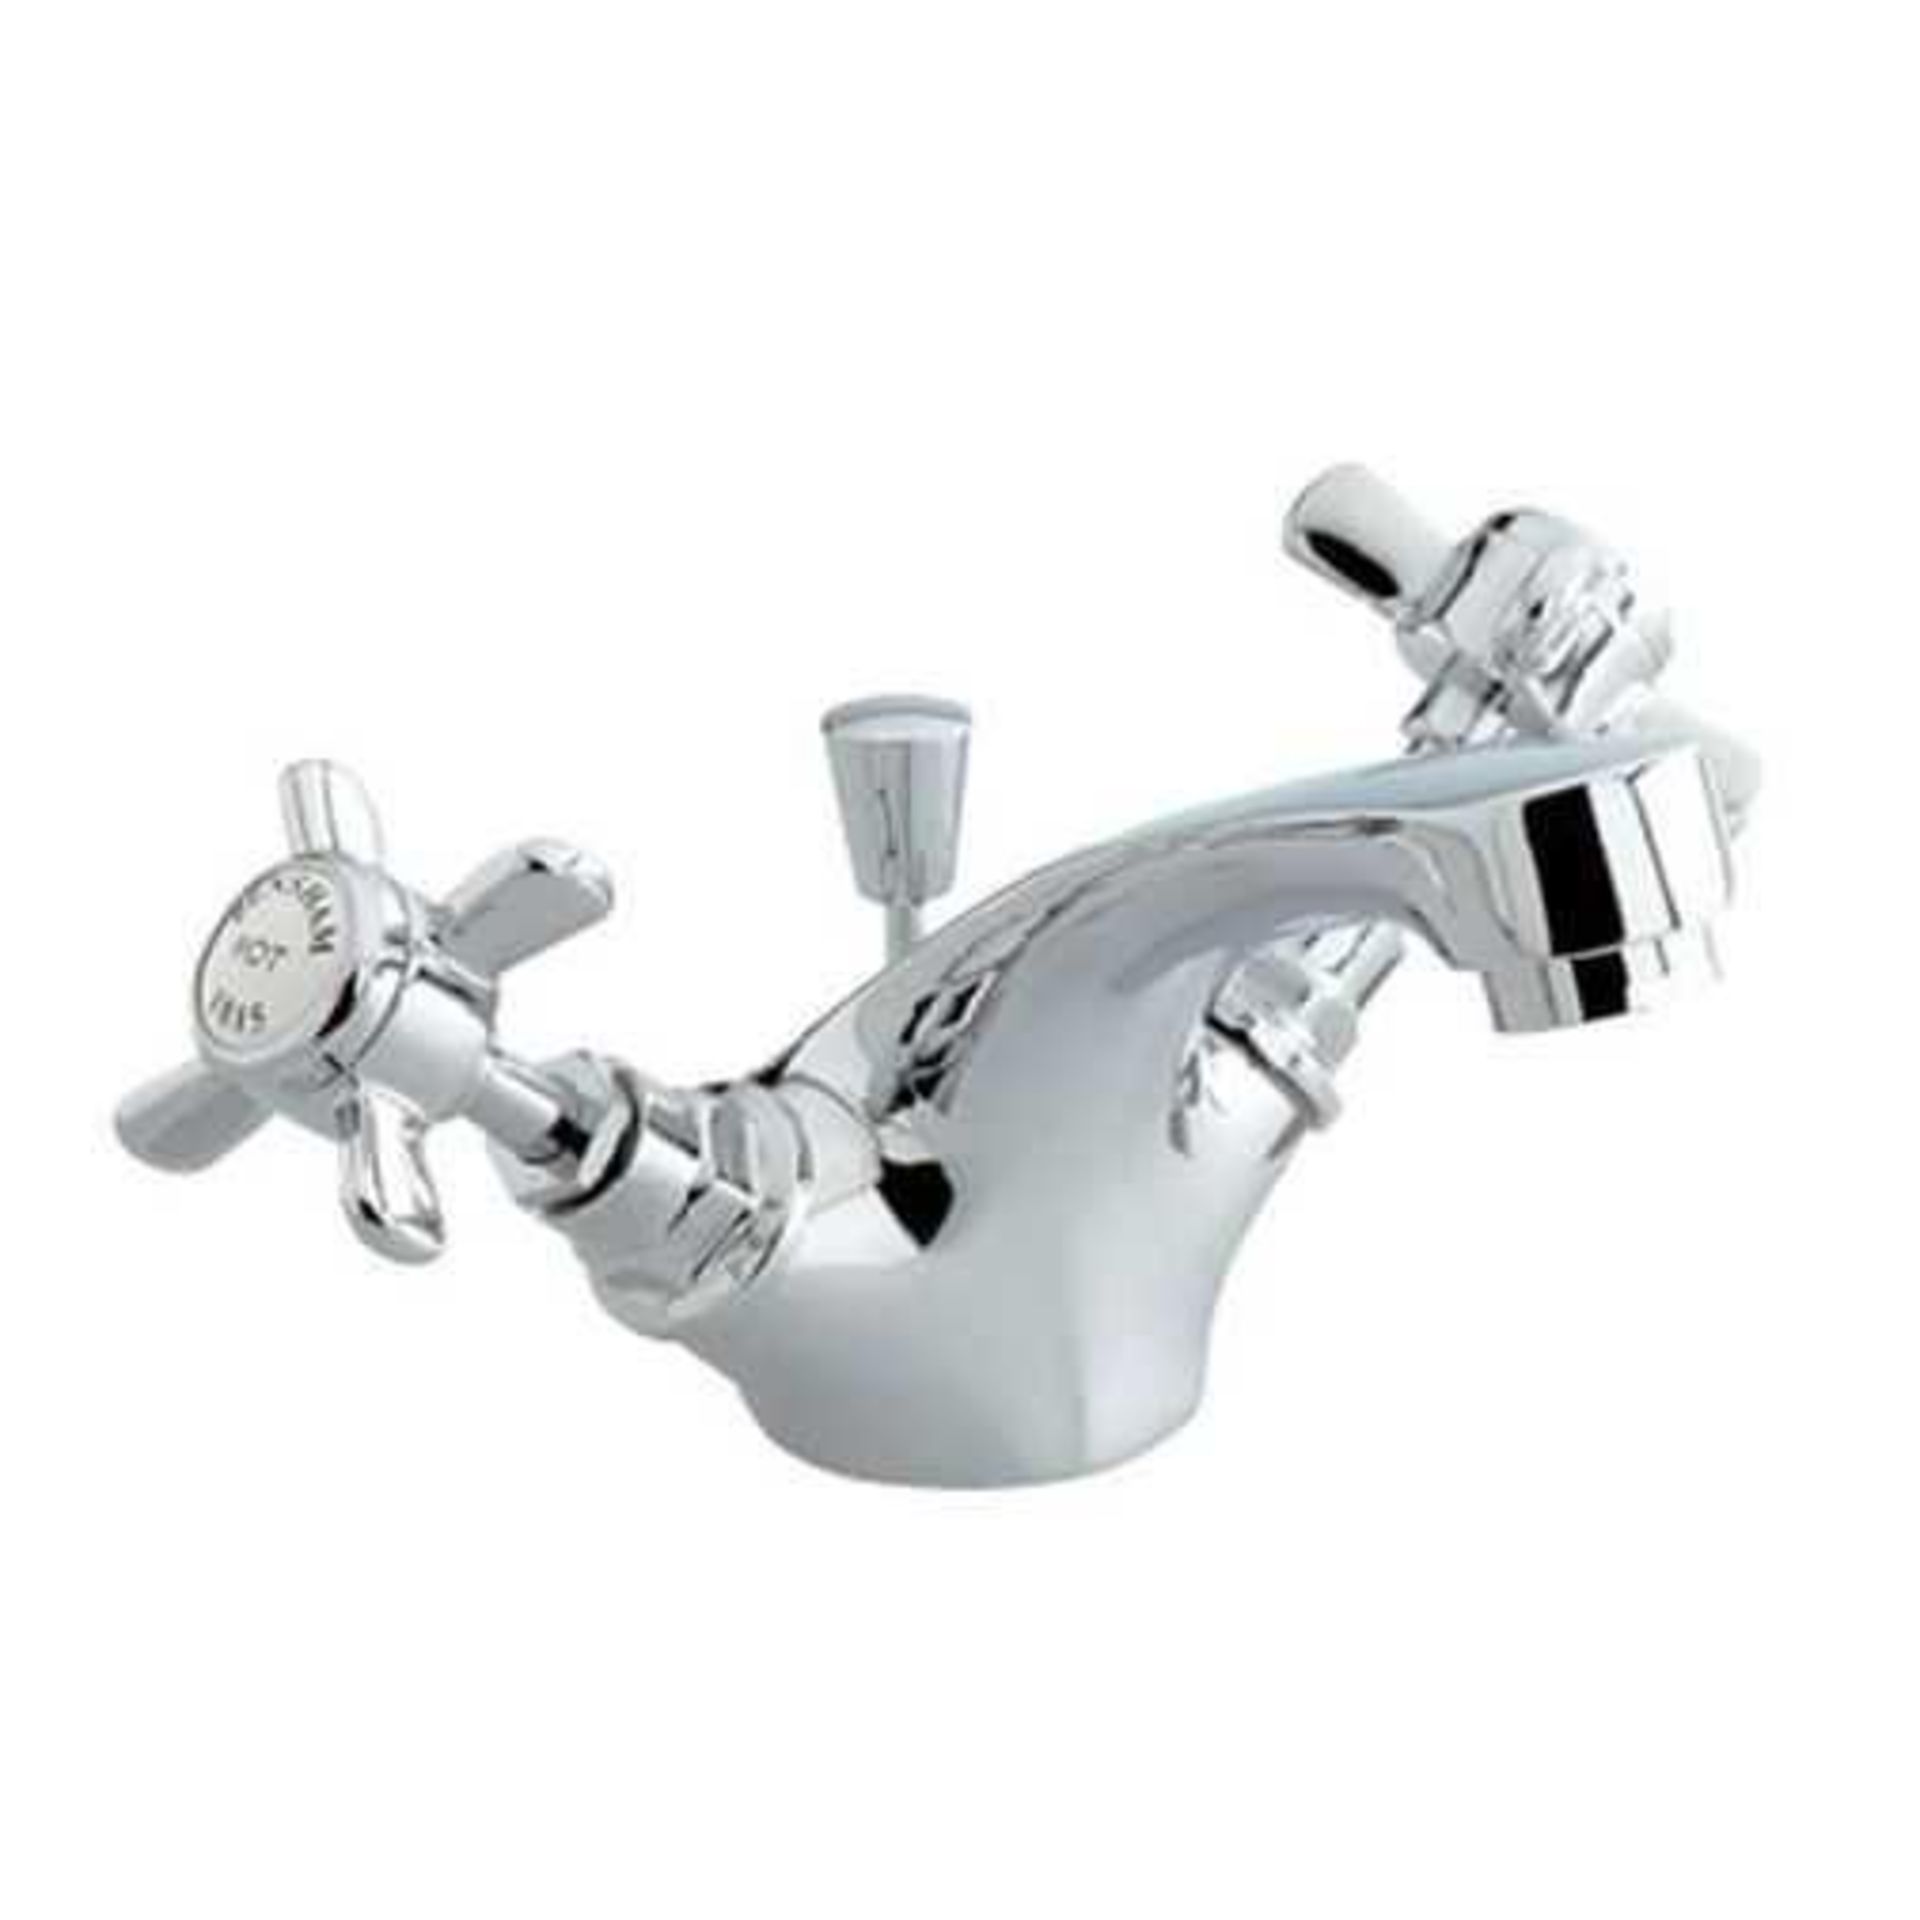 RRP £200 Each Boxed Bensham Traditional Basin Mixer Tap With Pop-Up Waste